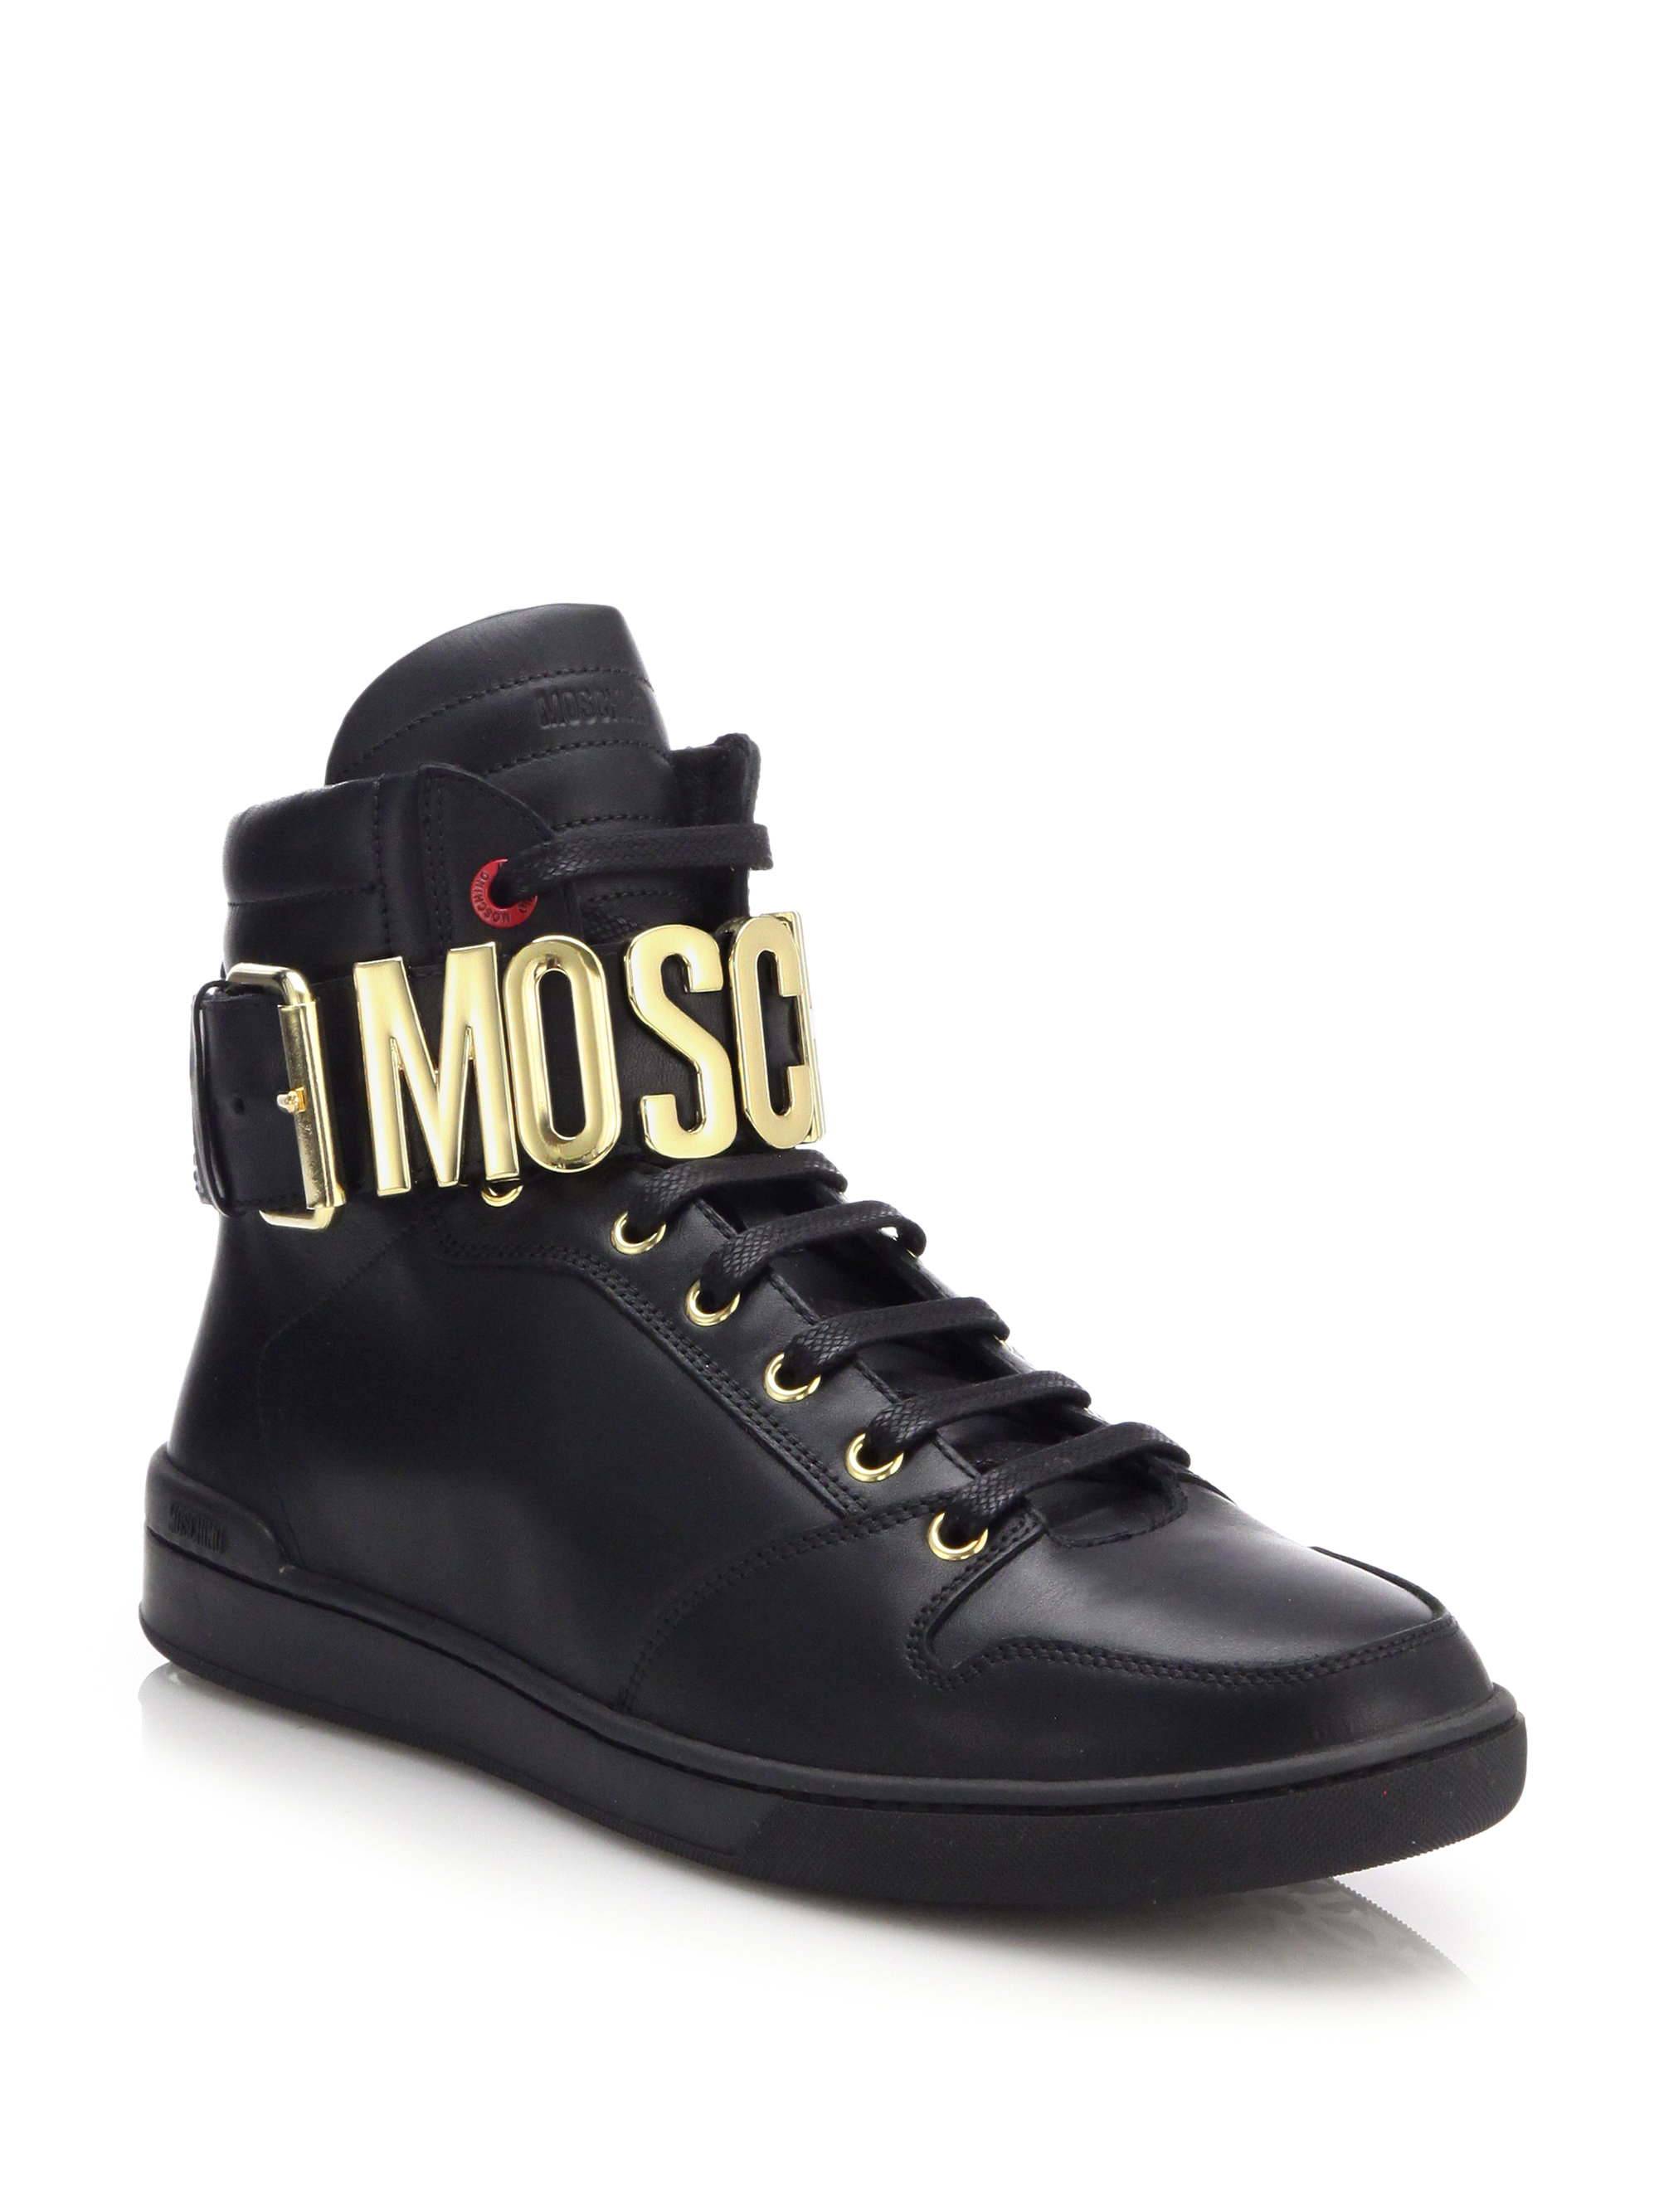 Lyst - Moschino Logo Ankle Strap Leather High-Top Sneakers in Black for Men